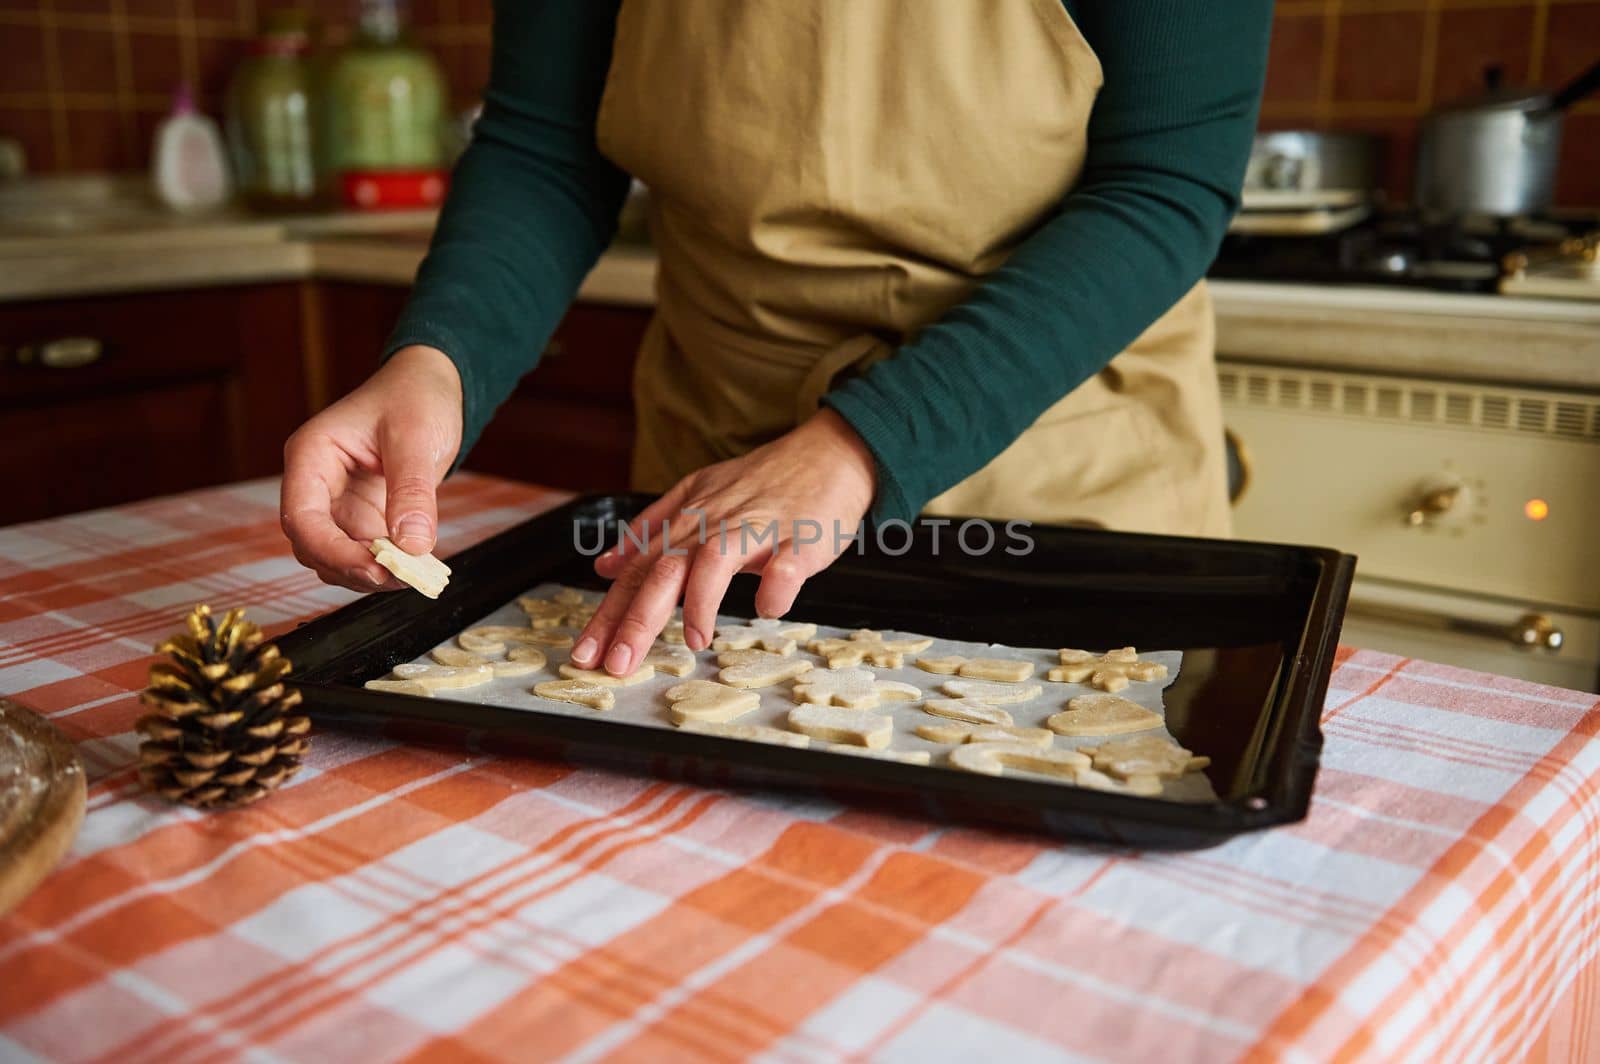 A woman housewife in beige chef's apron, putting cookies cut out of gingerbread dough on the baking sheet, preparing Christmas pastries in the home kitchen with wooden vintage design. Baking concept